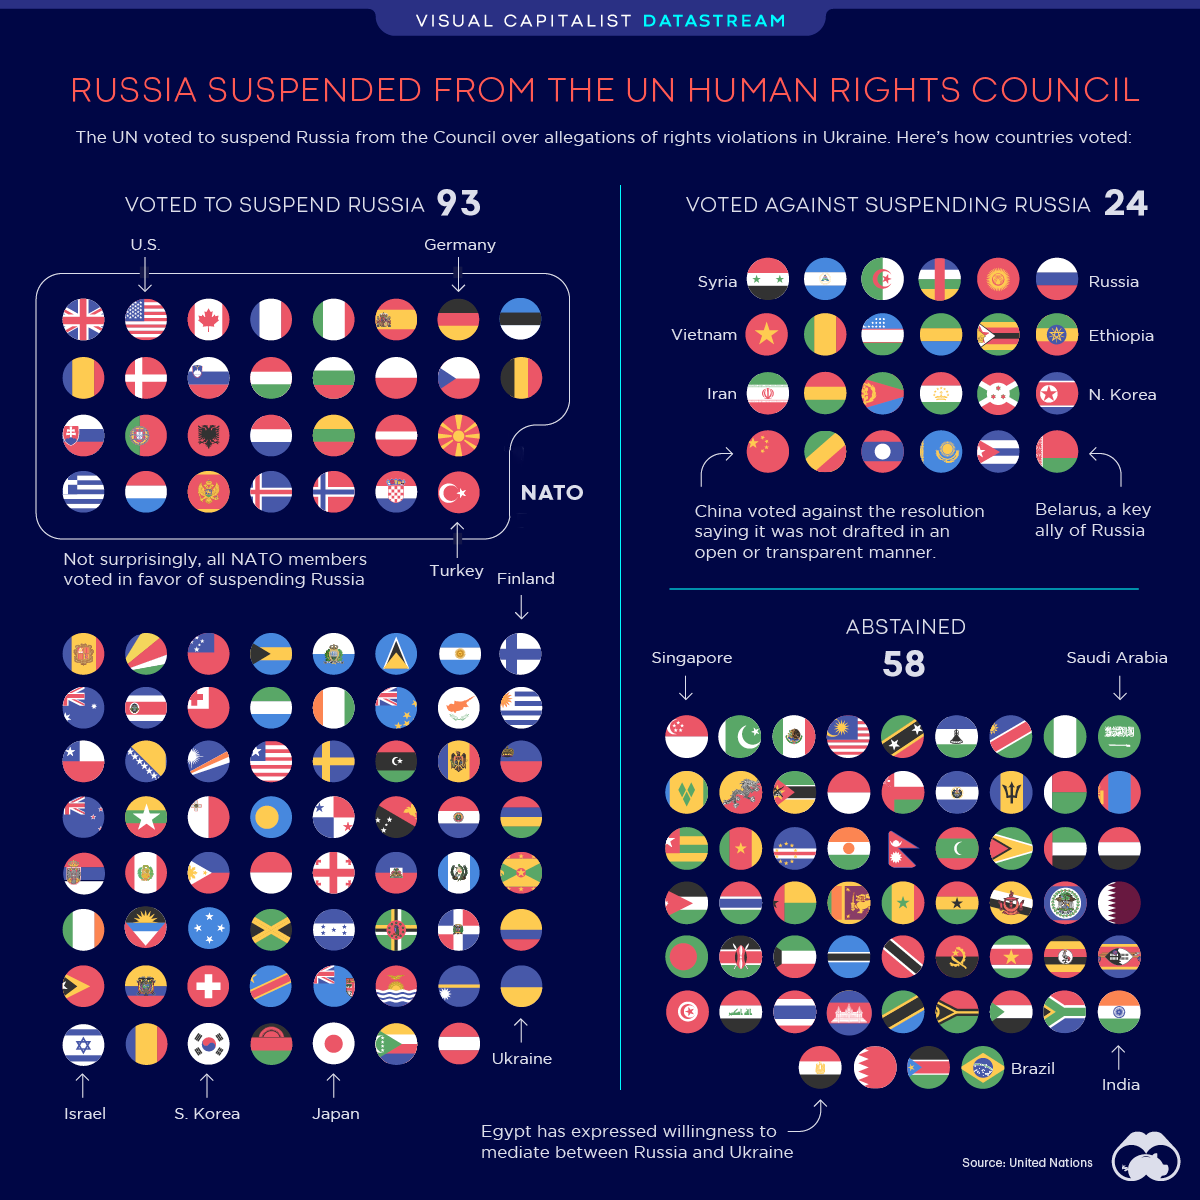 Visualization showing Russia's suspension from UN Human Rights Council. 93 countries voted for the resolution, 24 against